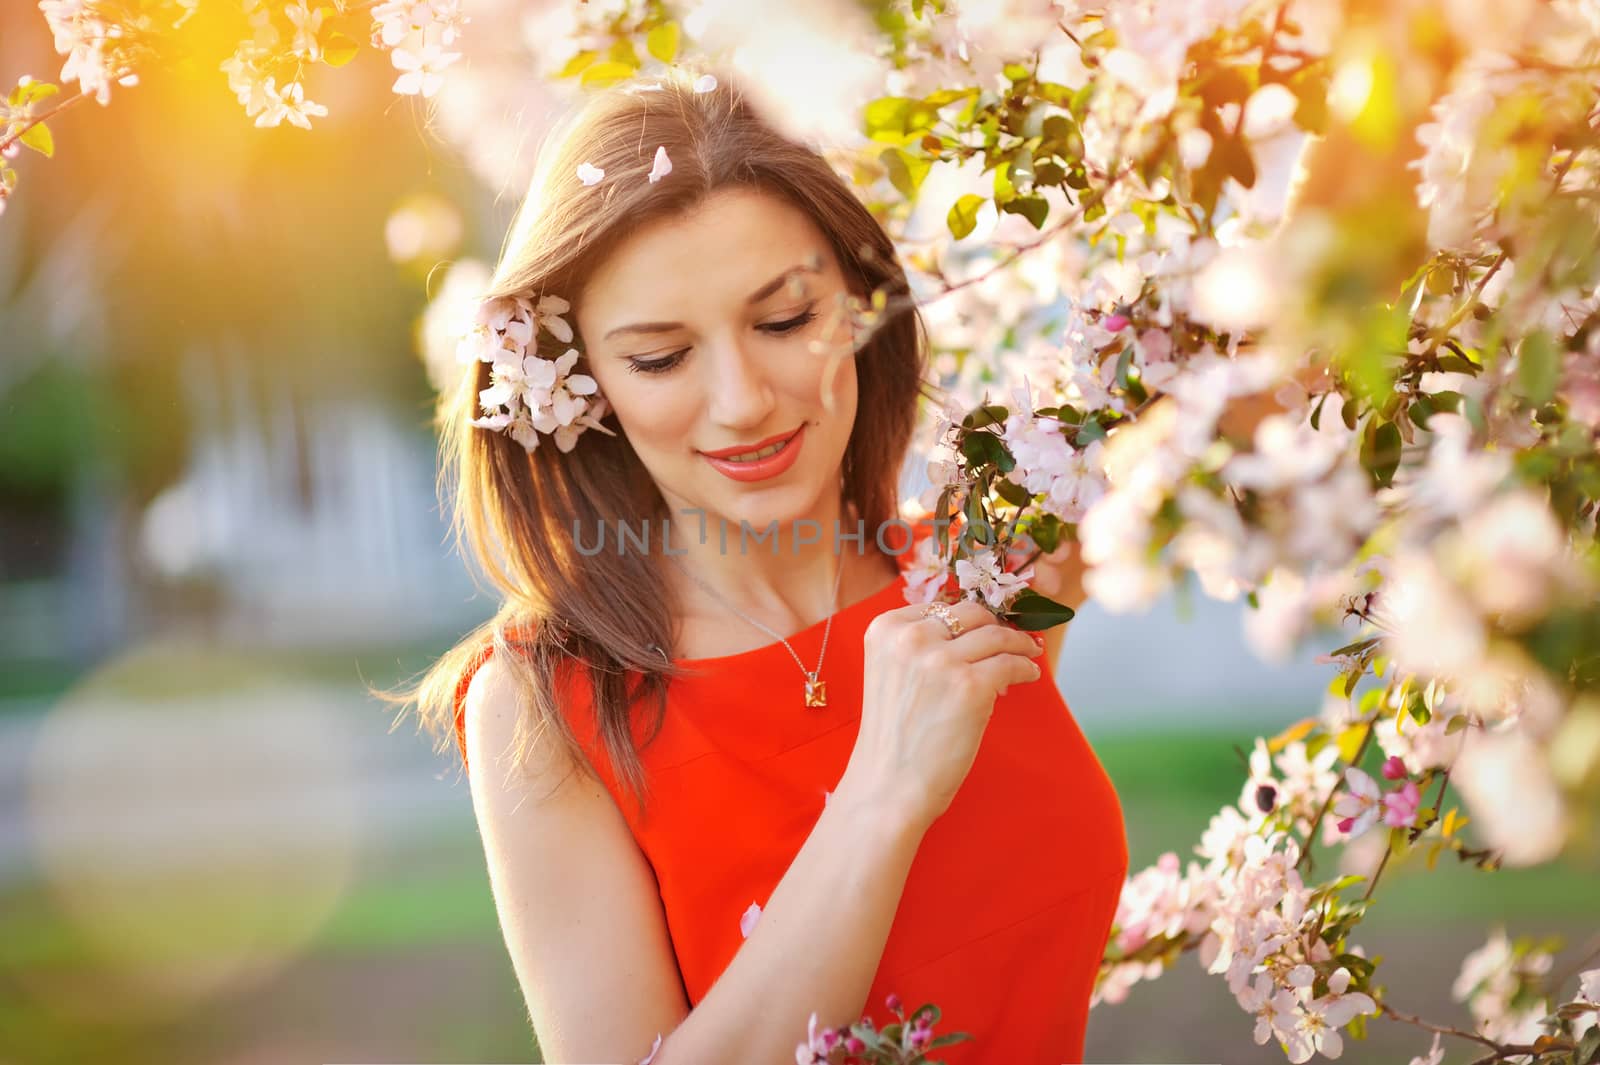 beautiful girl on a walk among the blooming trees.